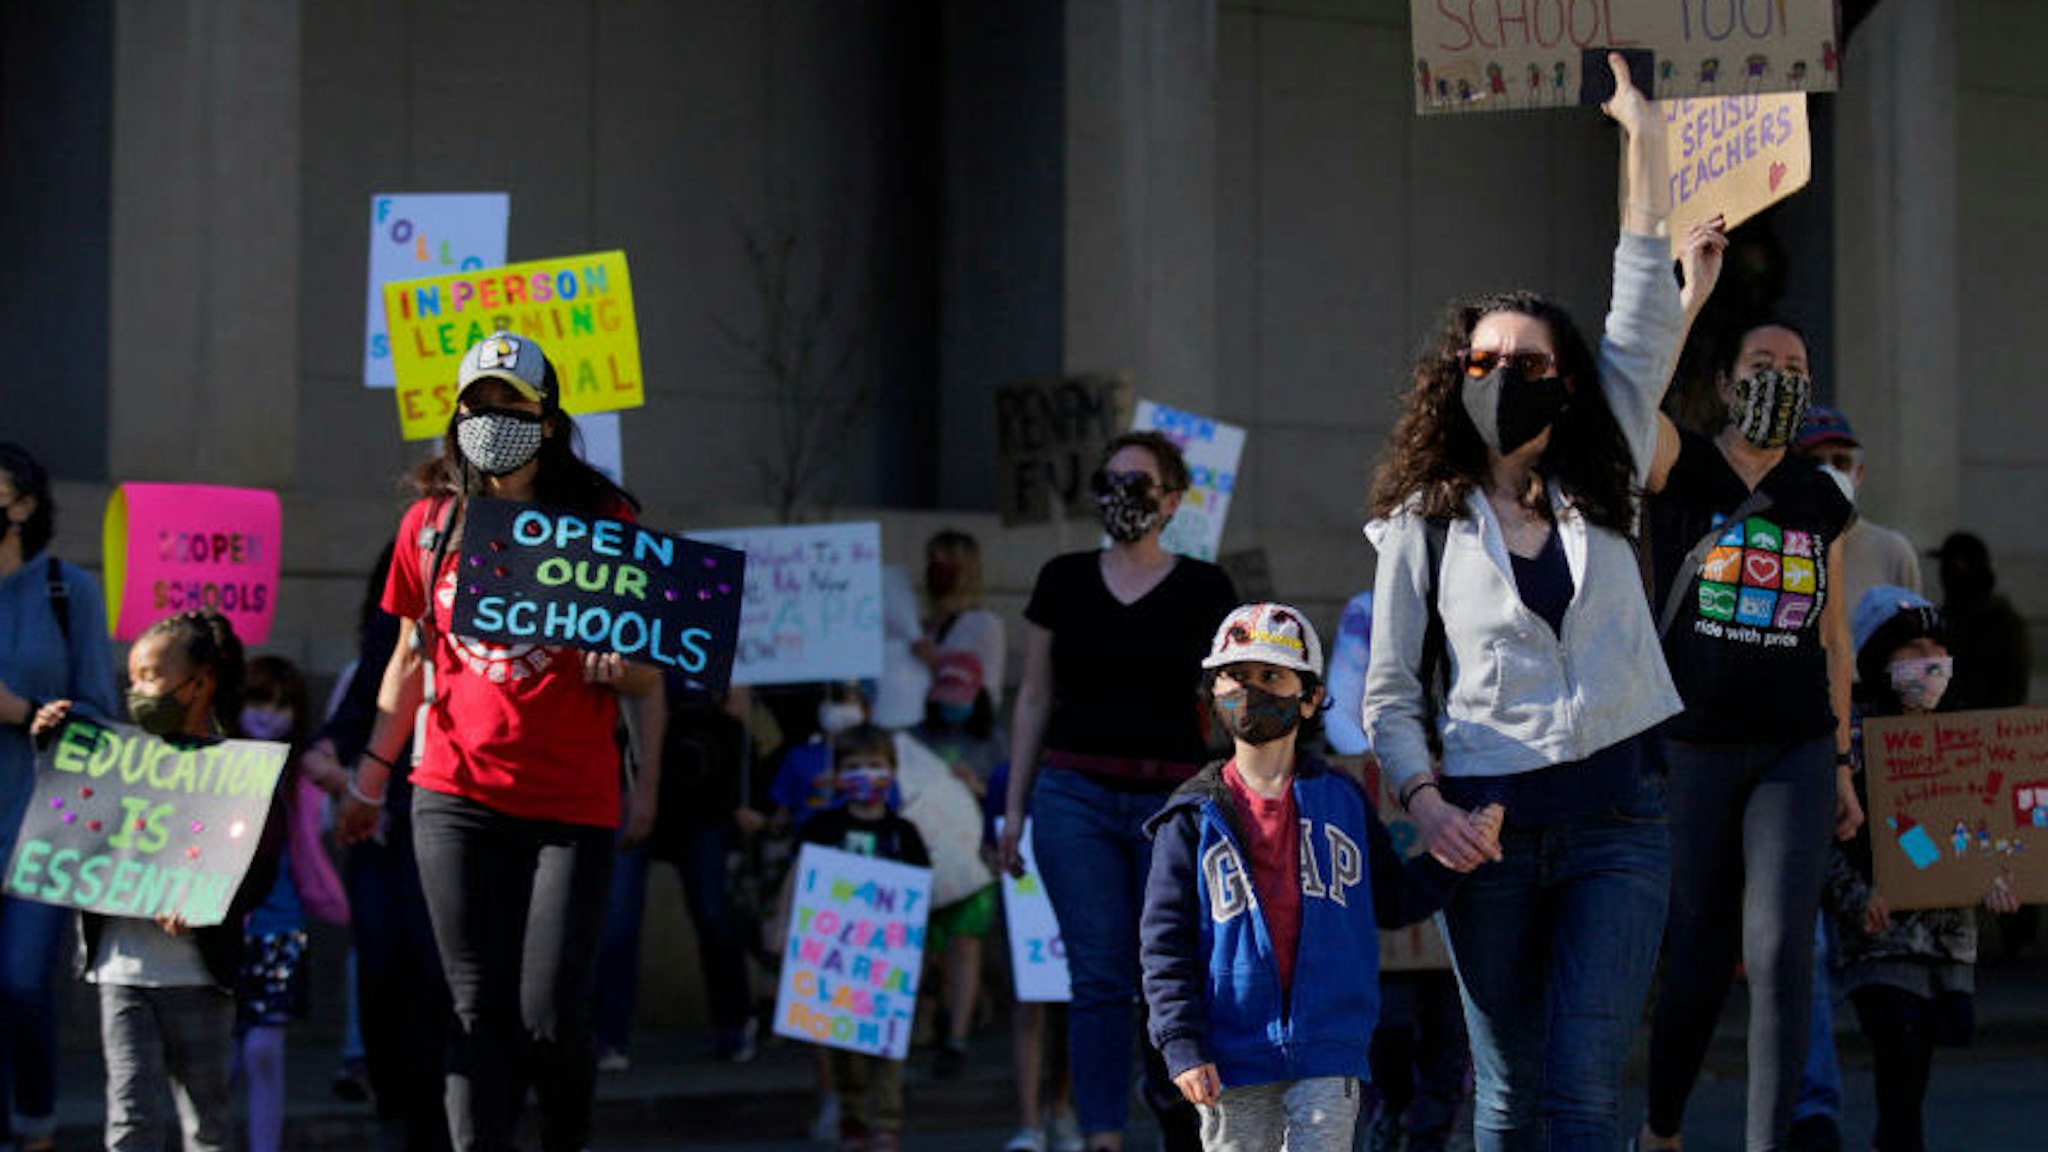 SAN FRANCISCO, CA - FEB. 6: Hundreds of people march to City Hall after rallying outside the SFUSD building, Saturday, Feb. 6, 2021, in San Francisco, Calif. People protested against remote education and demanded schools to reopen in-person education. (Santiago Mejia/The San Francisco Chronicle via Getty Images)